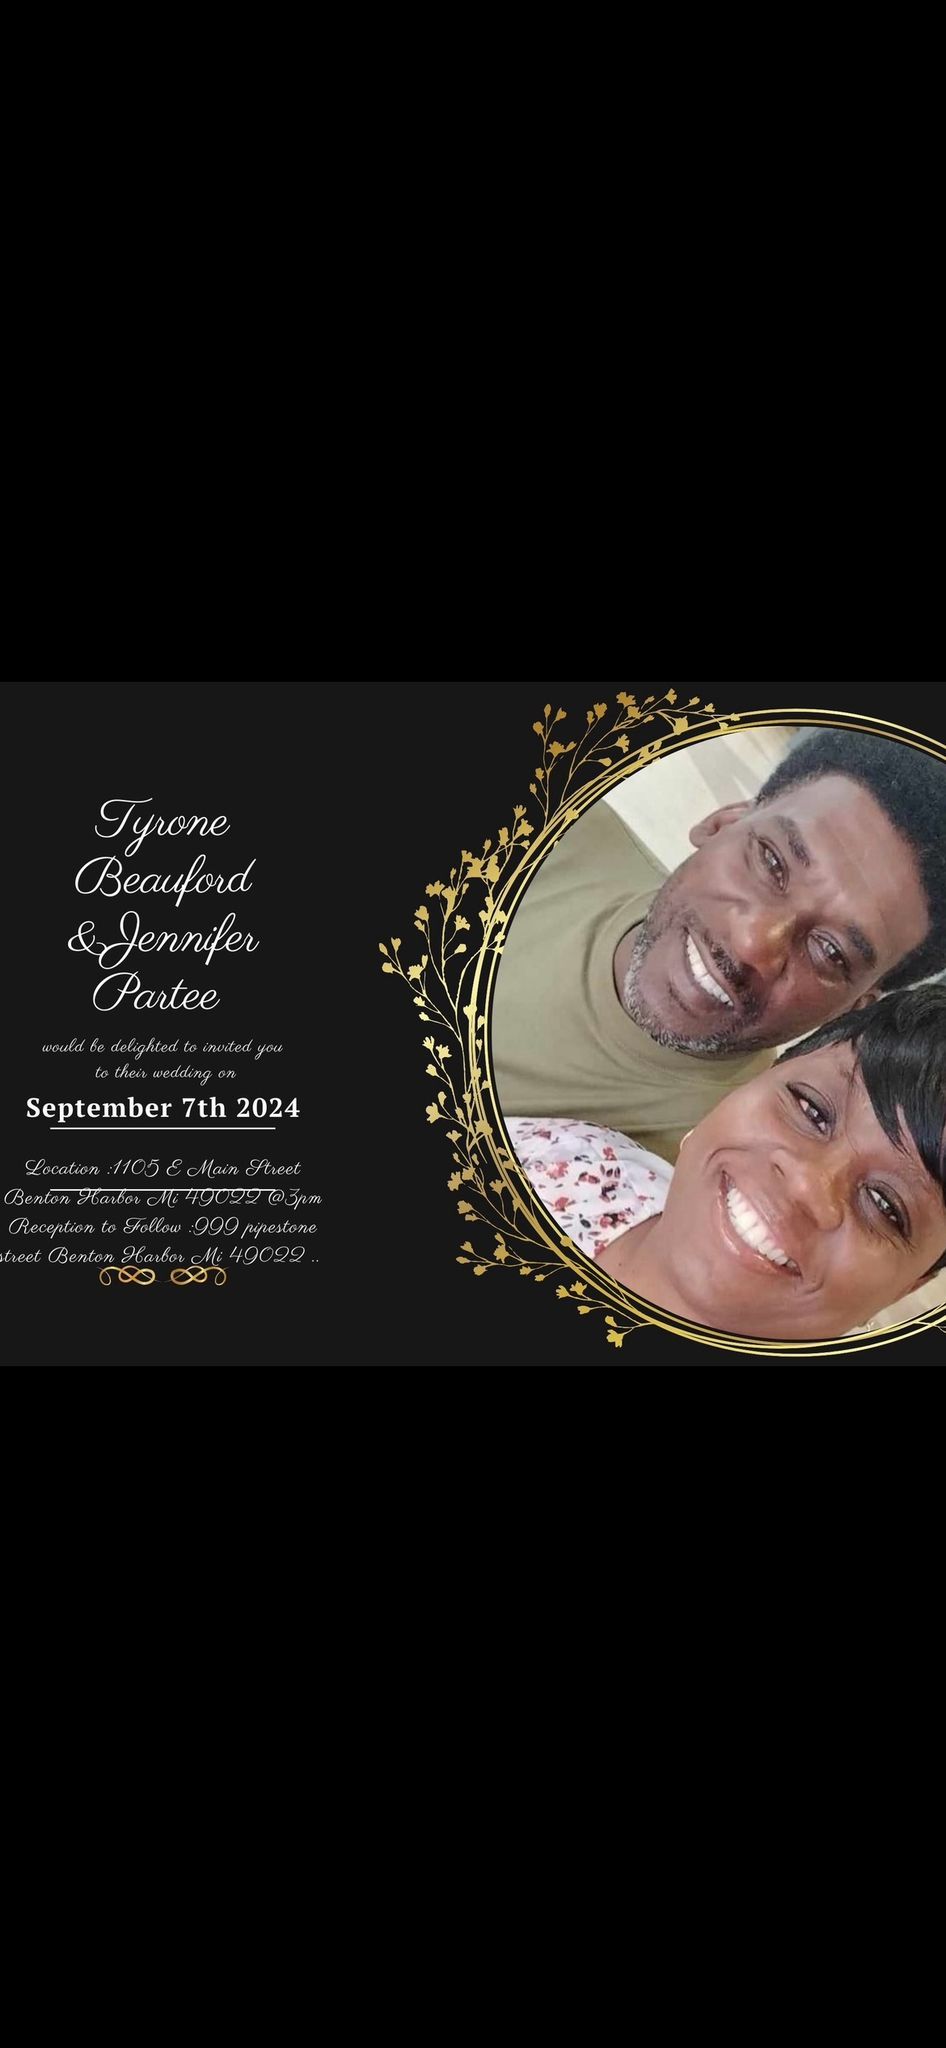 Save The Date \ud83d\udc8d The Beauford\u2019s wedding 